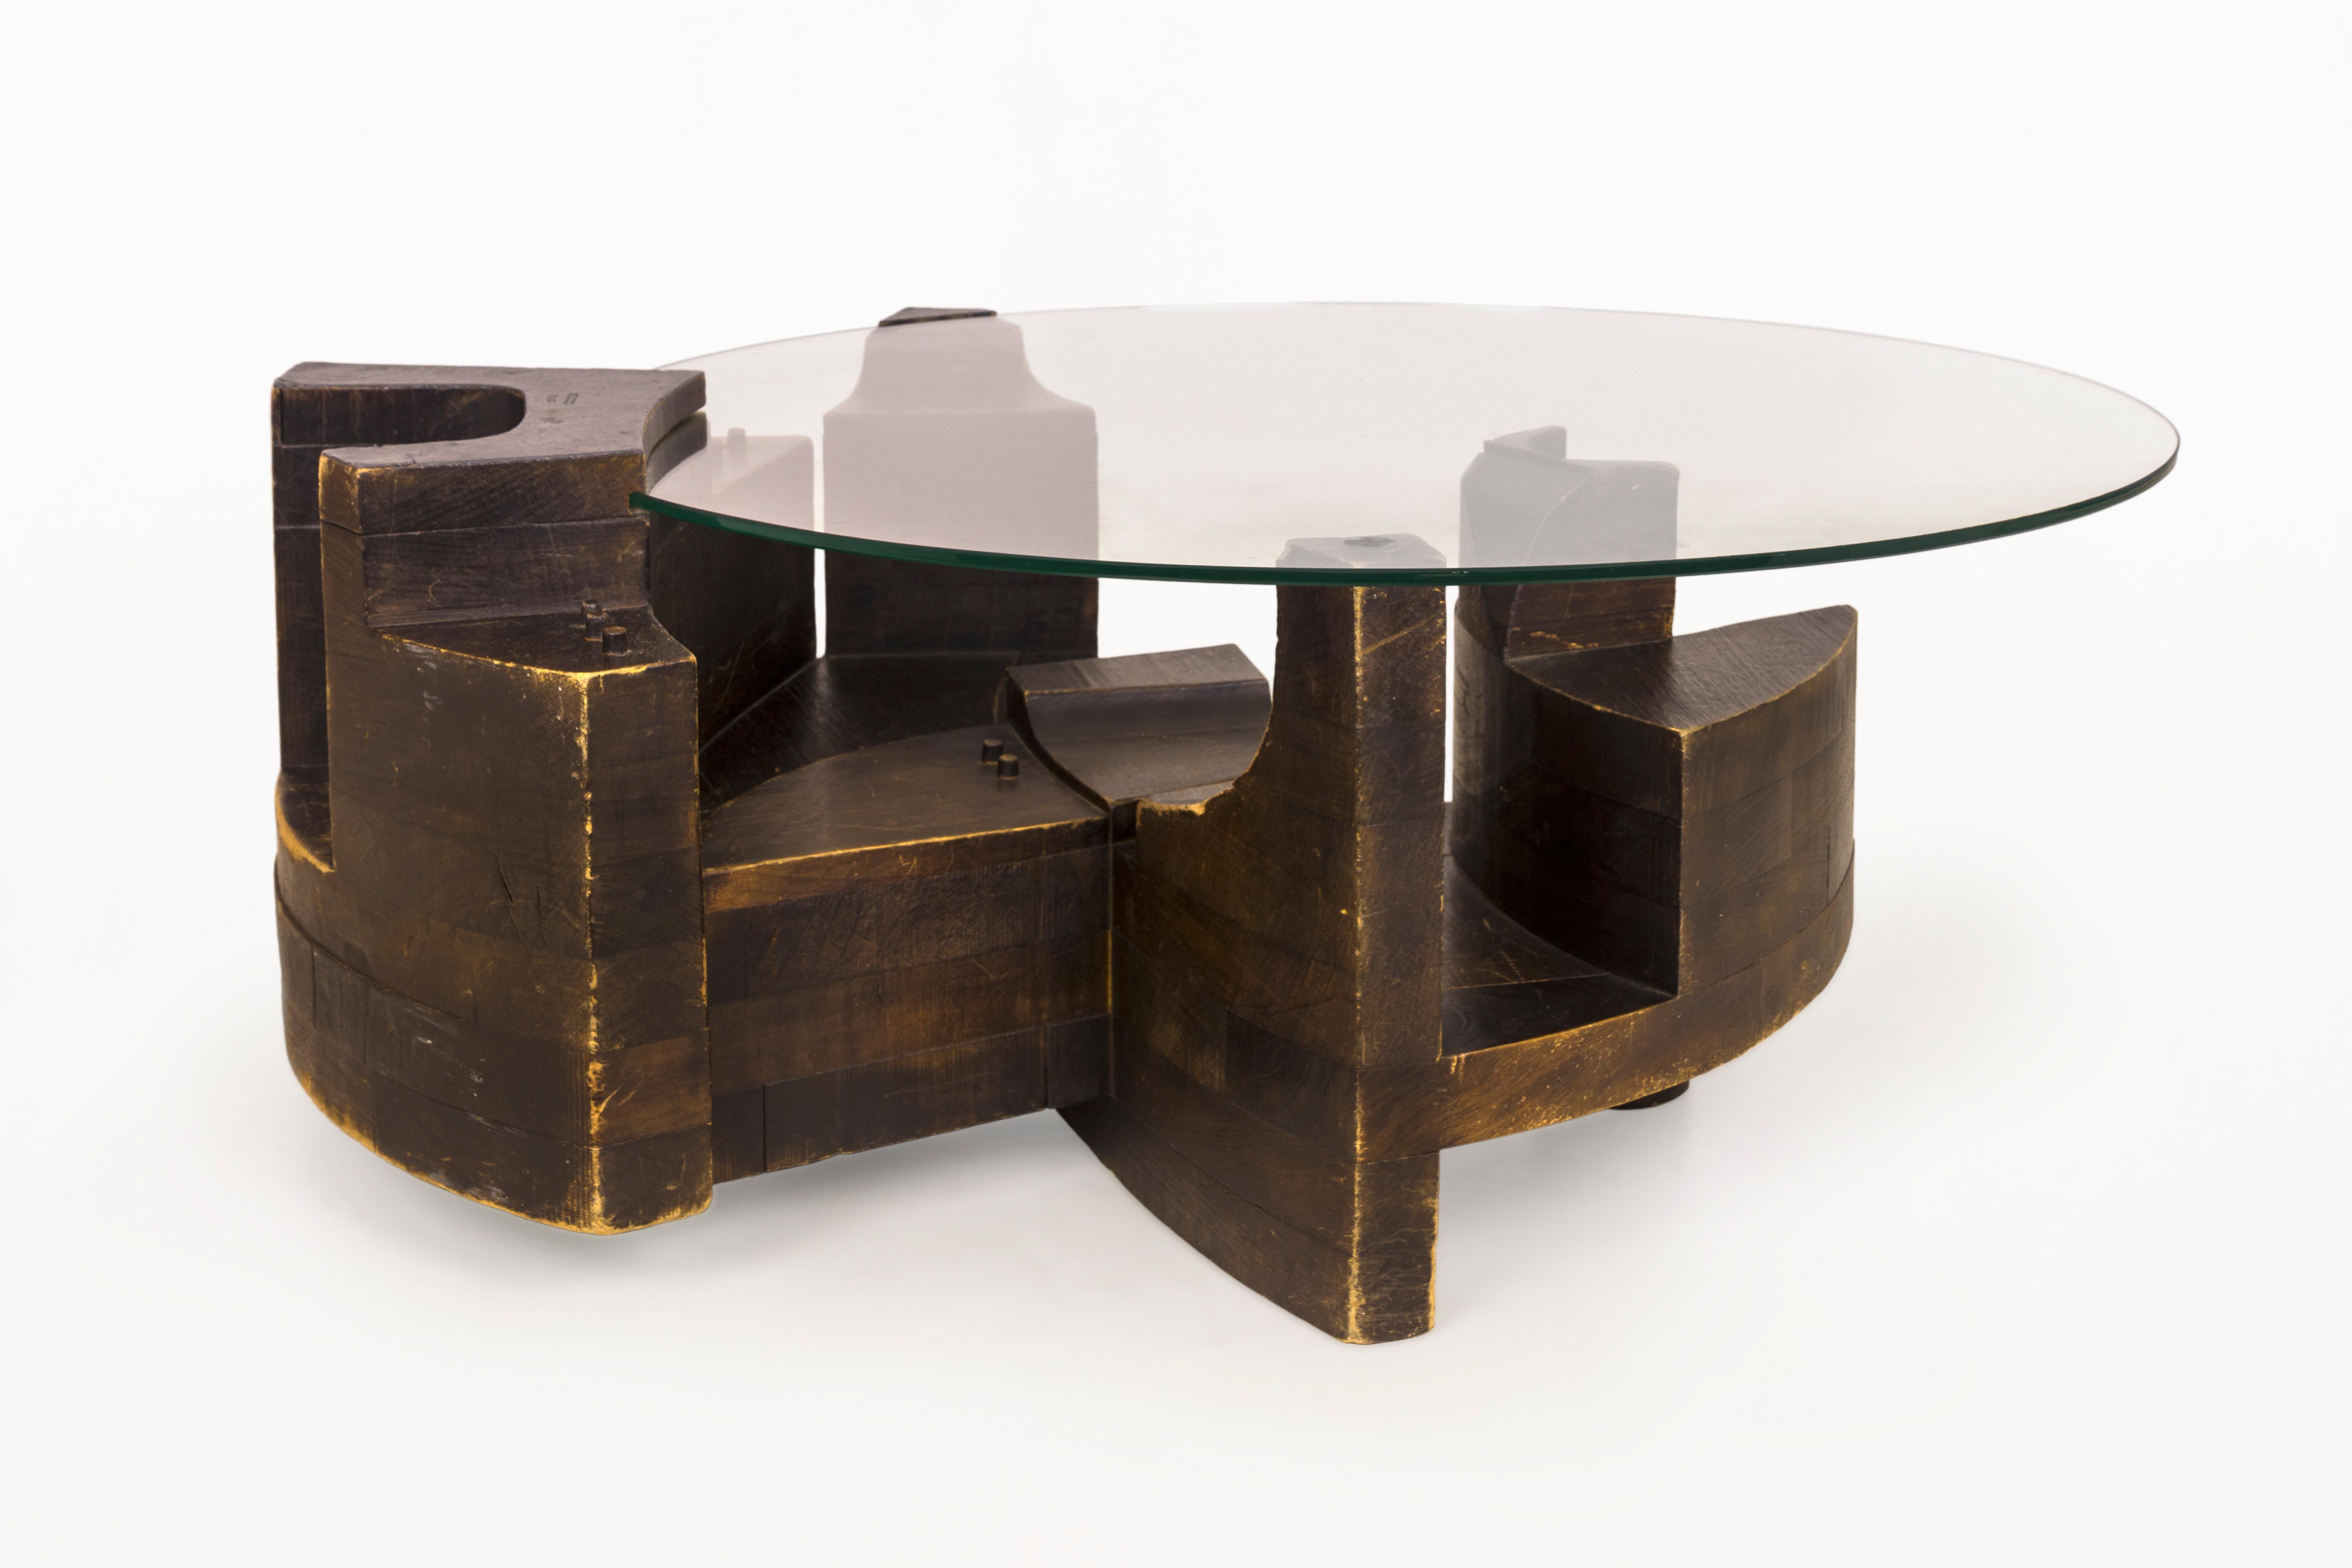 Nerone and Patuzzi Gruppo NP2 coffee table.
Signed and Numbered 79/200,
circa 1970, Italy.
Good vintage condition.
Nerone Patuzzi is the brain child of Italian artist/designer Nerone Ceccarelli and Giancarlo Patuzzi. They formed their design